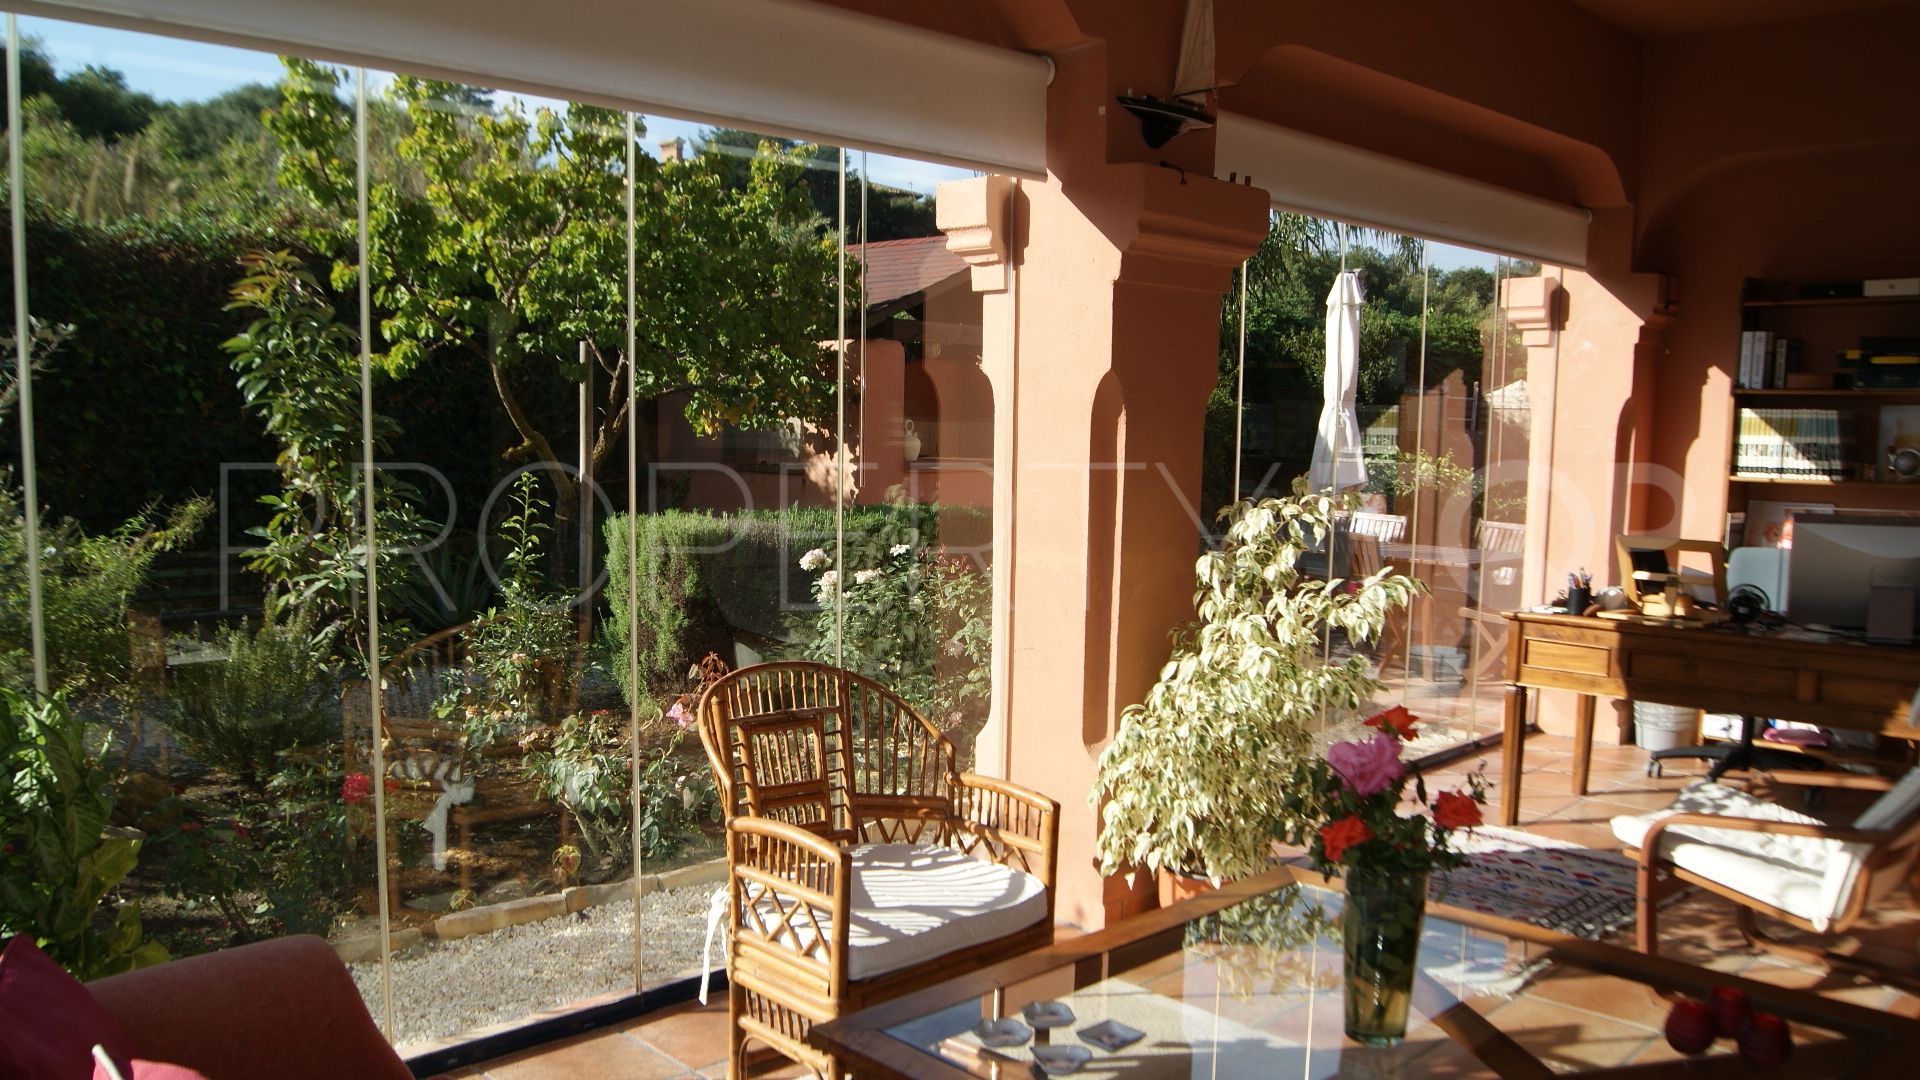 House for sale in Sotogrande Costa